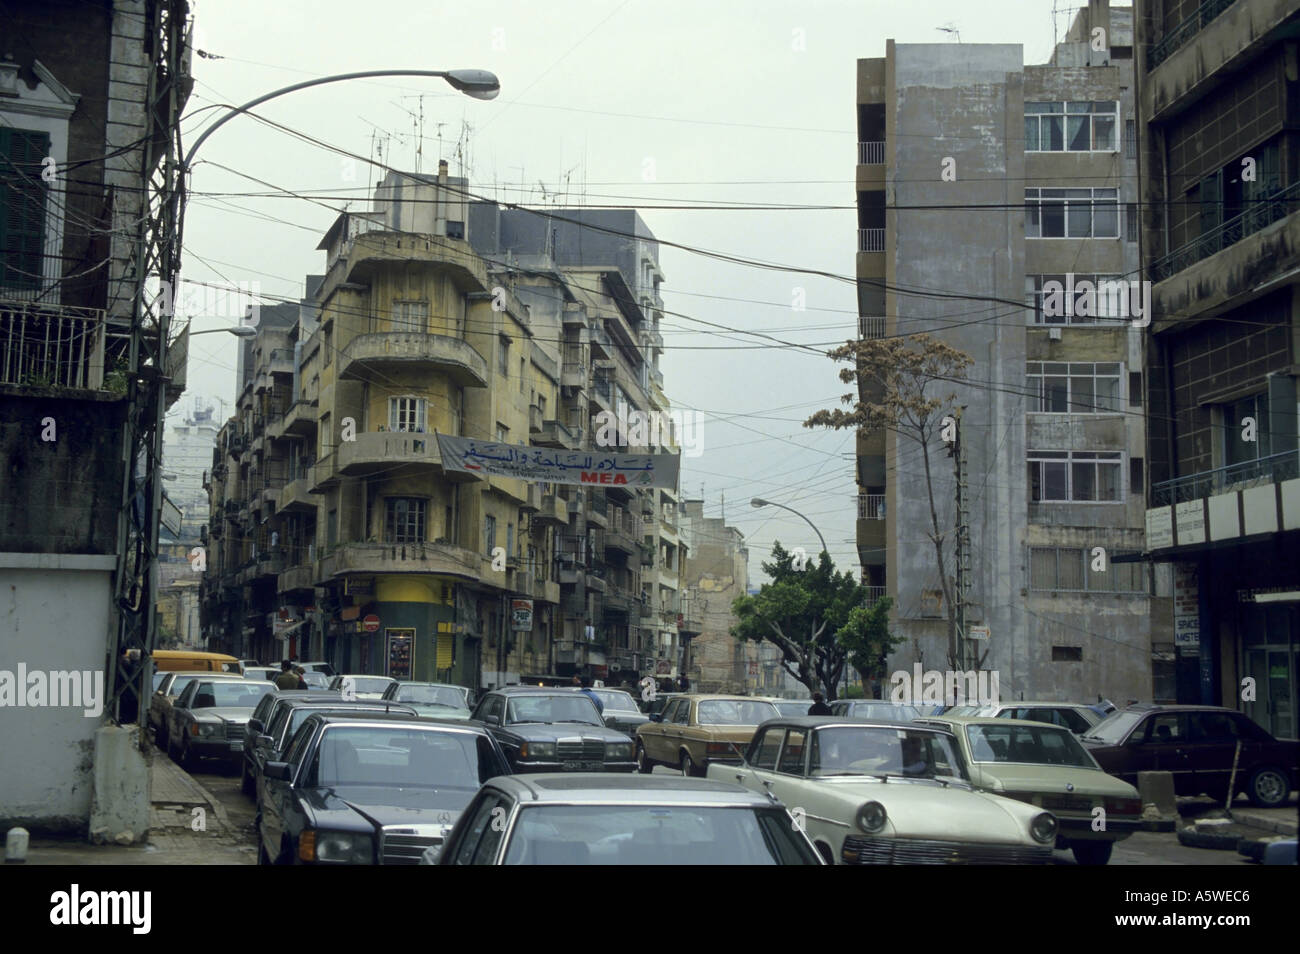 Lebanon Beirut In April 1994 After The Civil War Traffic Jam In Achrafieh District Stock Photo